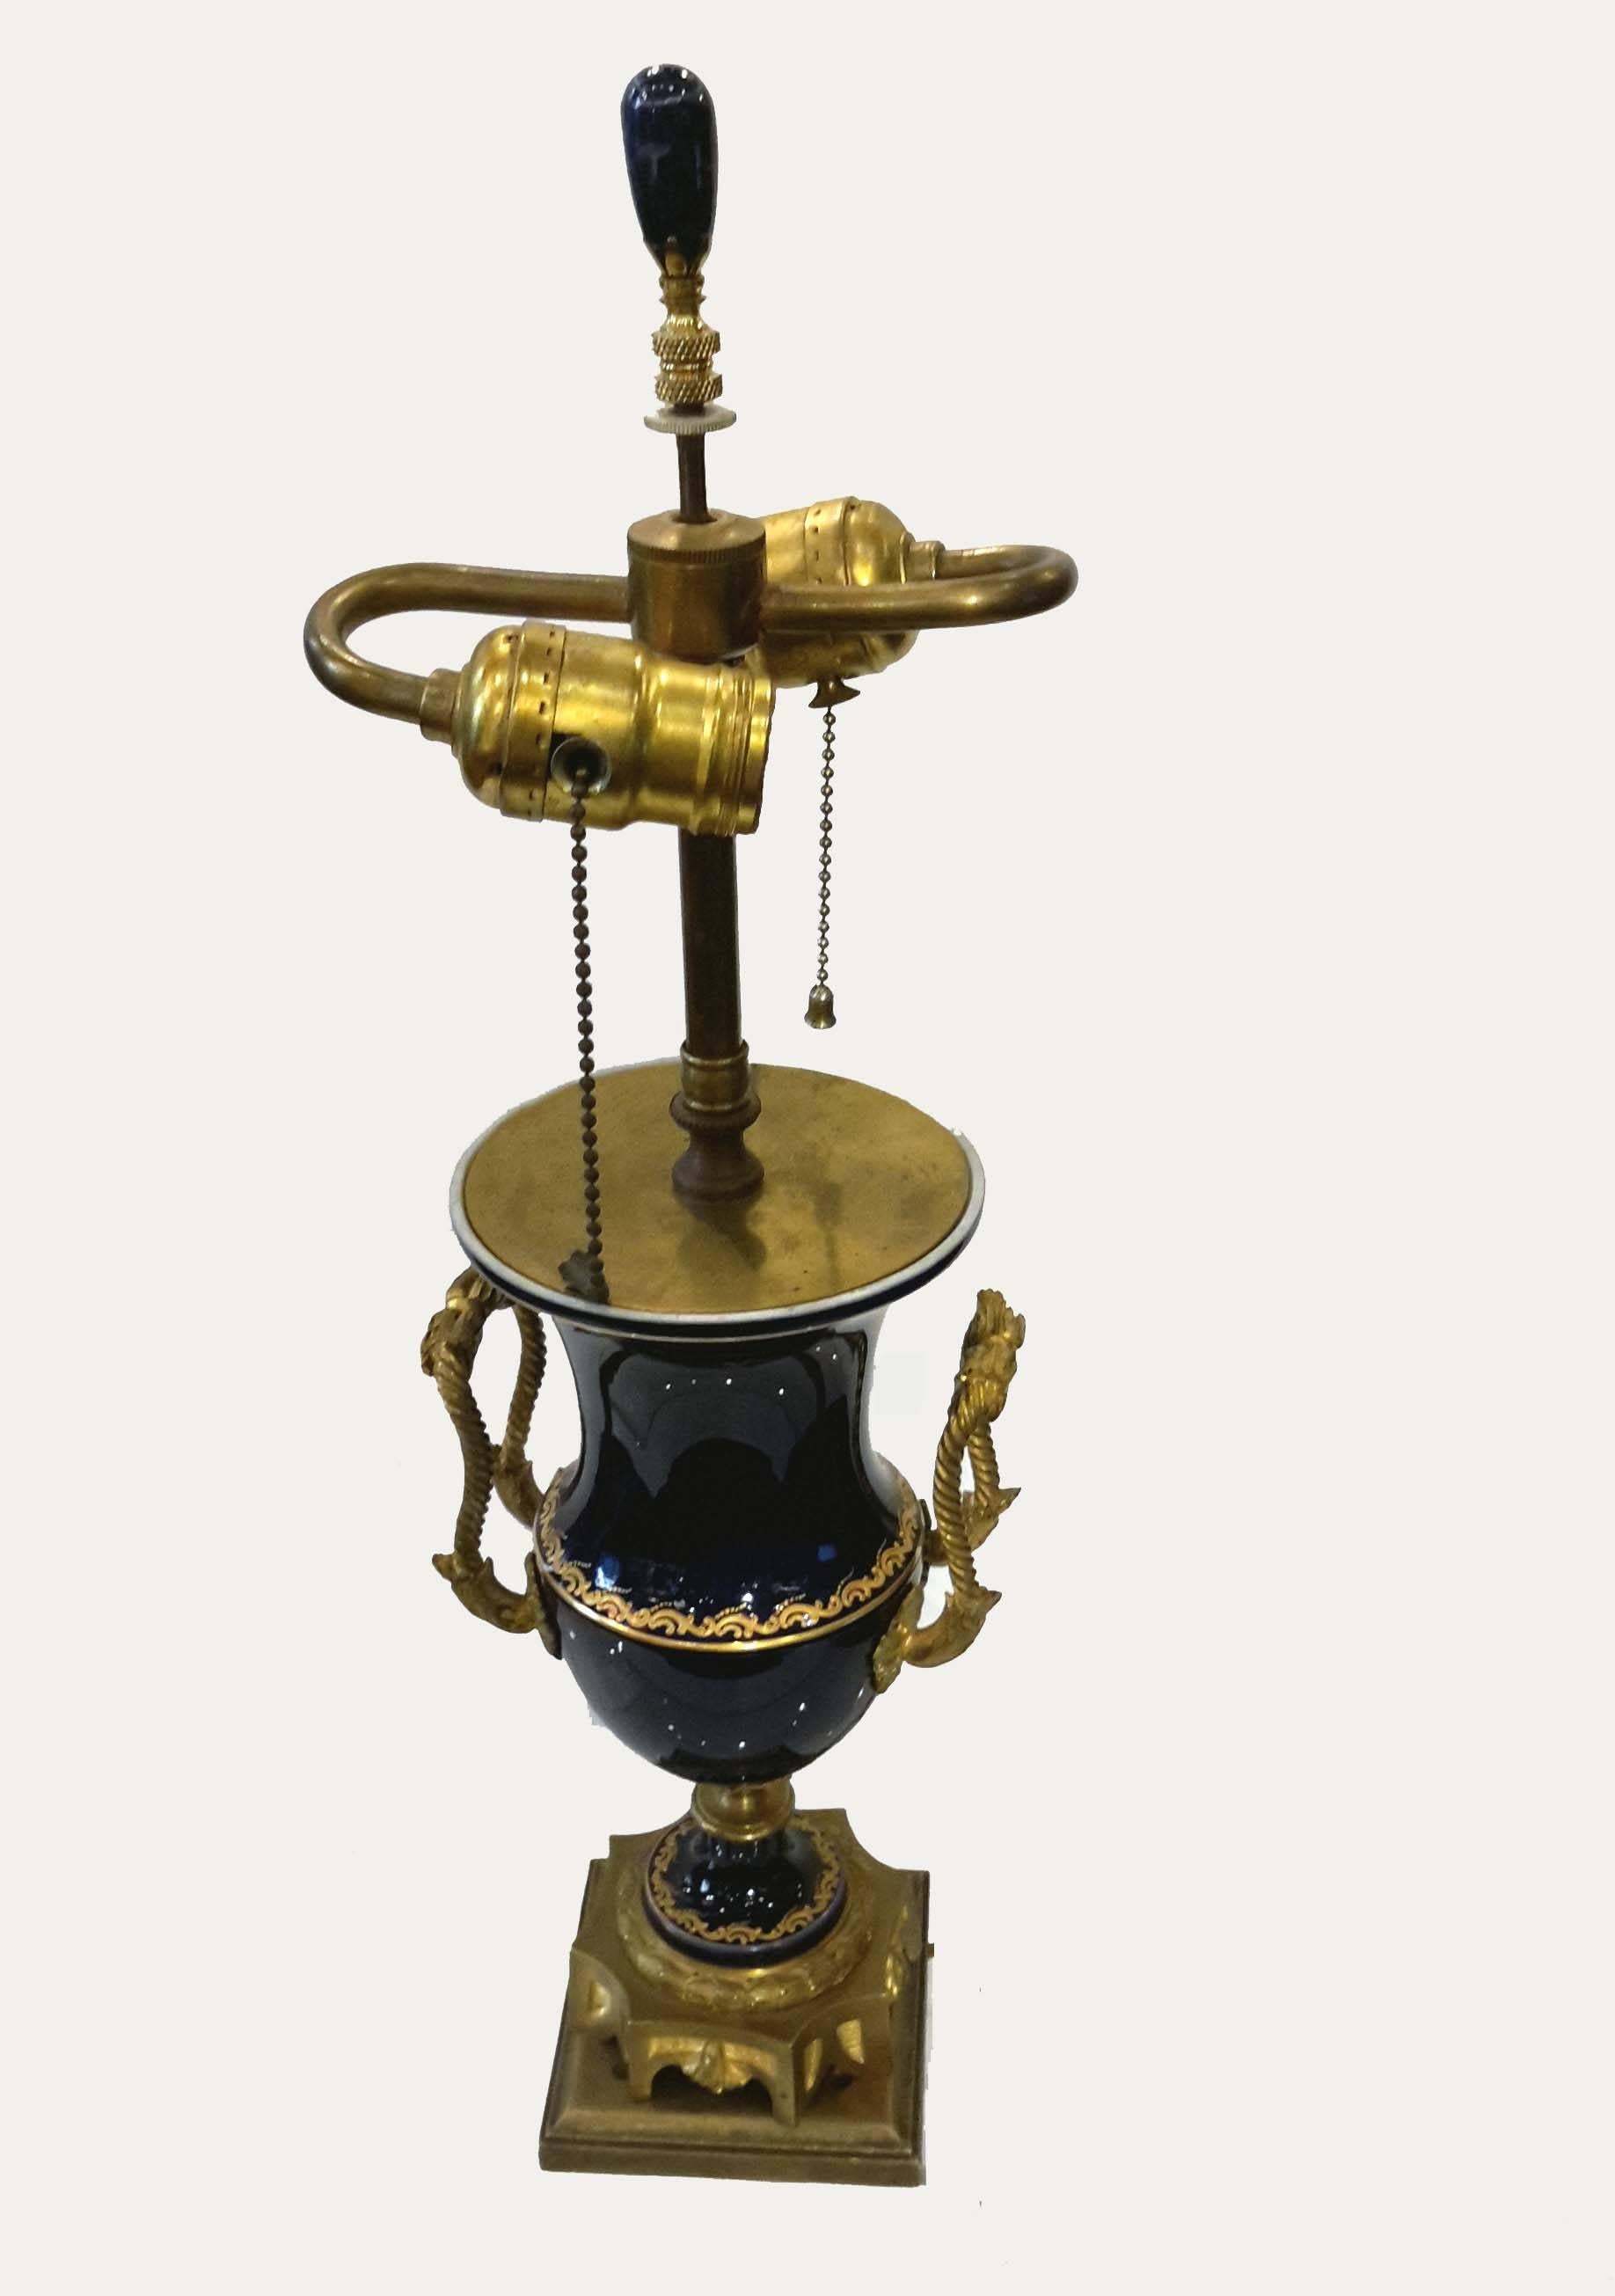 Great quality with Louis XVI coat of arm in raised gold, 19th century This lamp is in good working condition, and has a lapis finial.